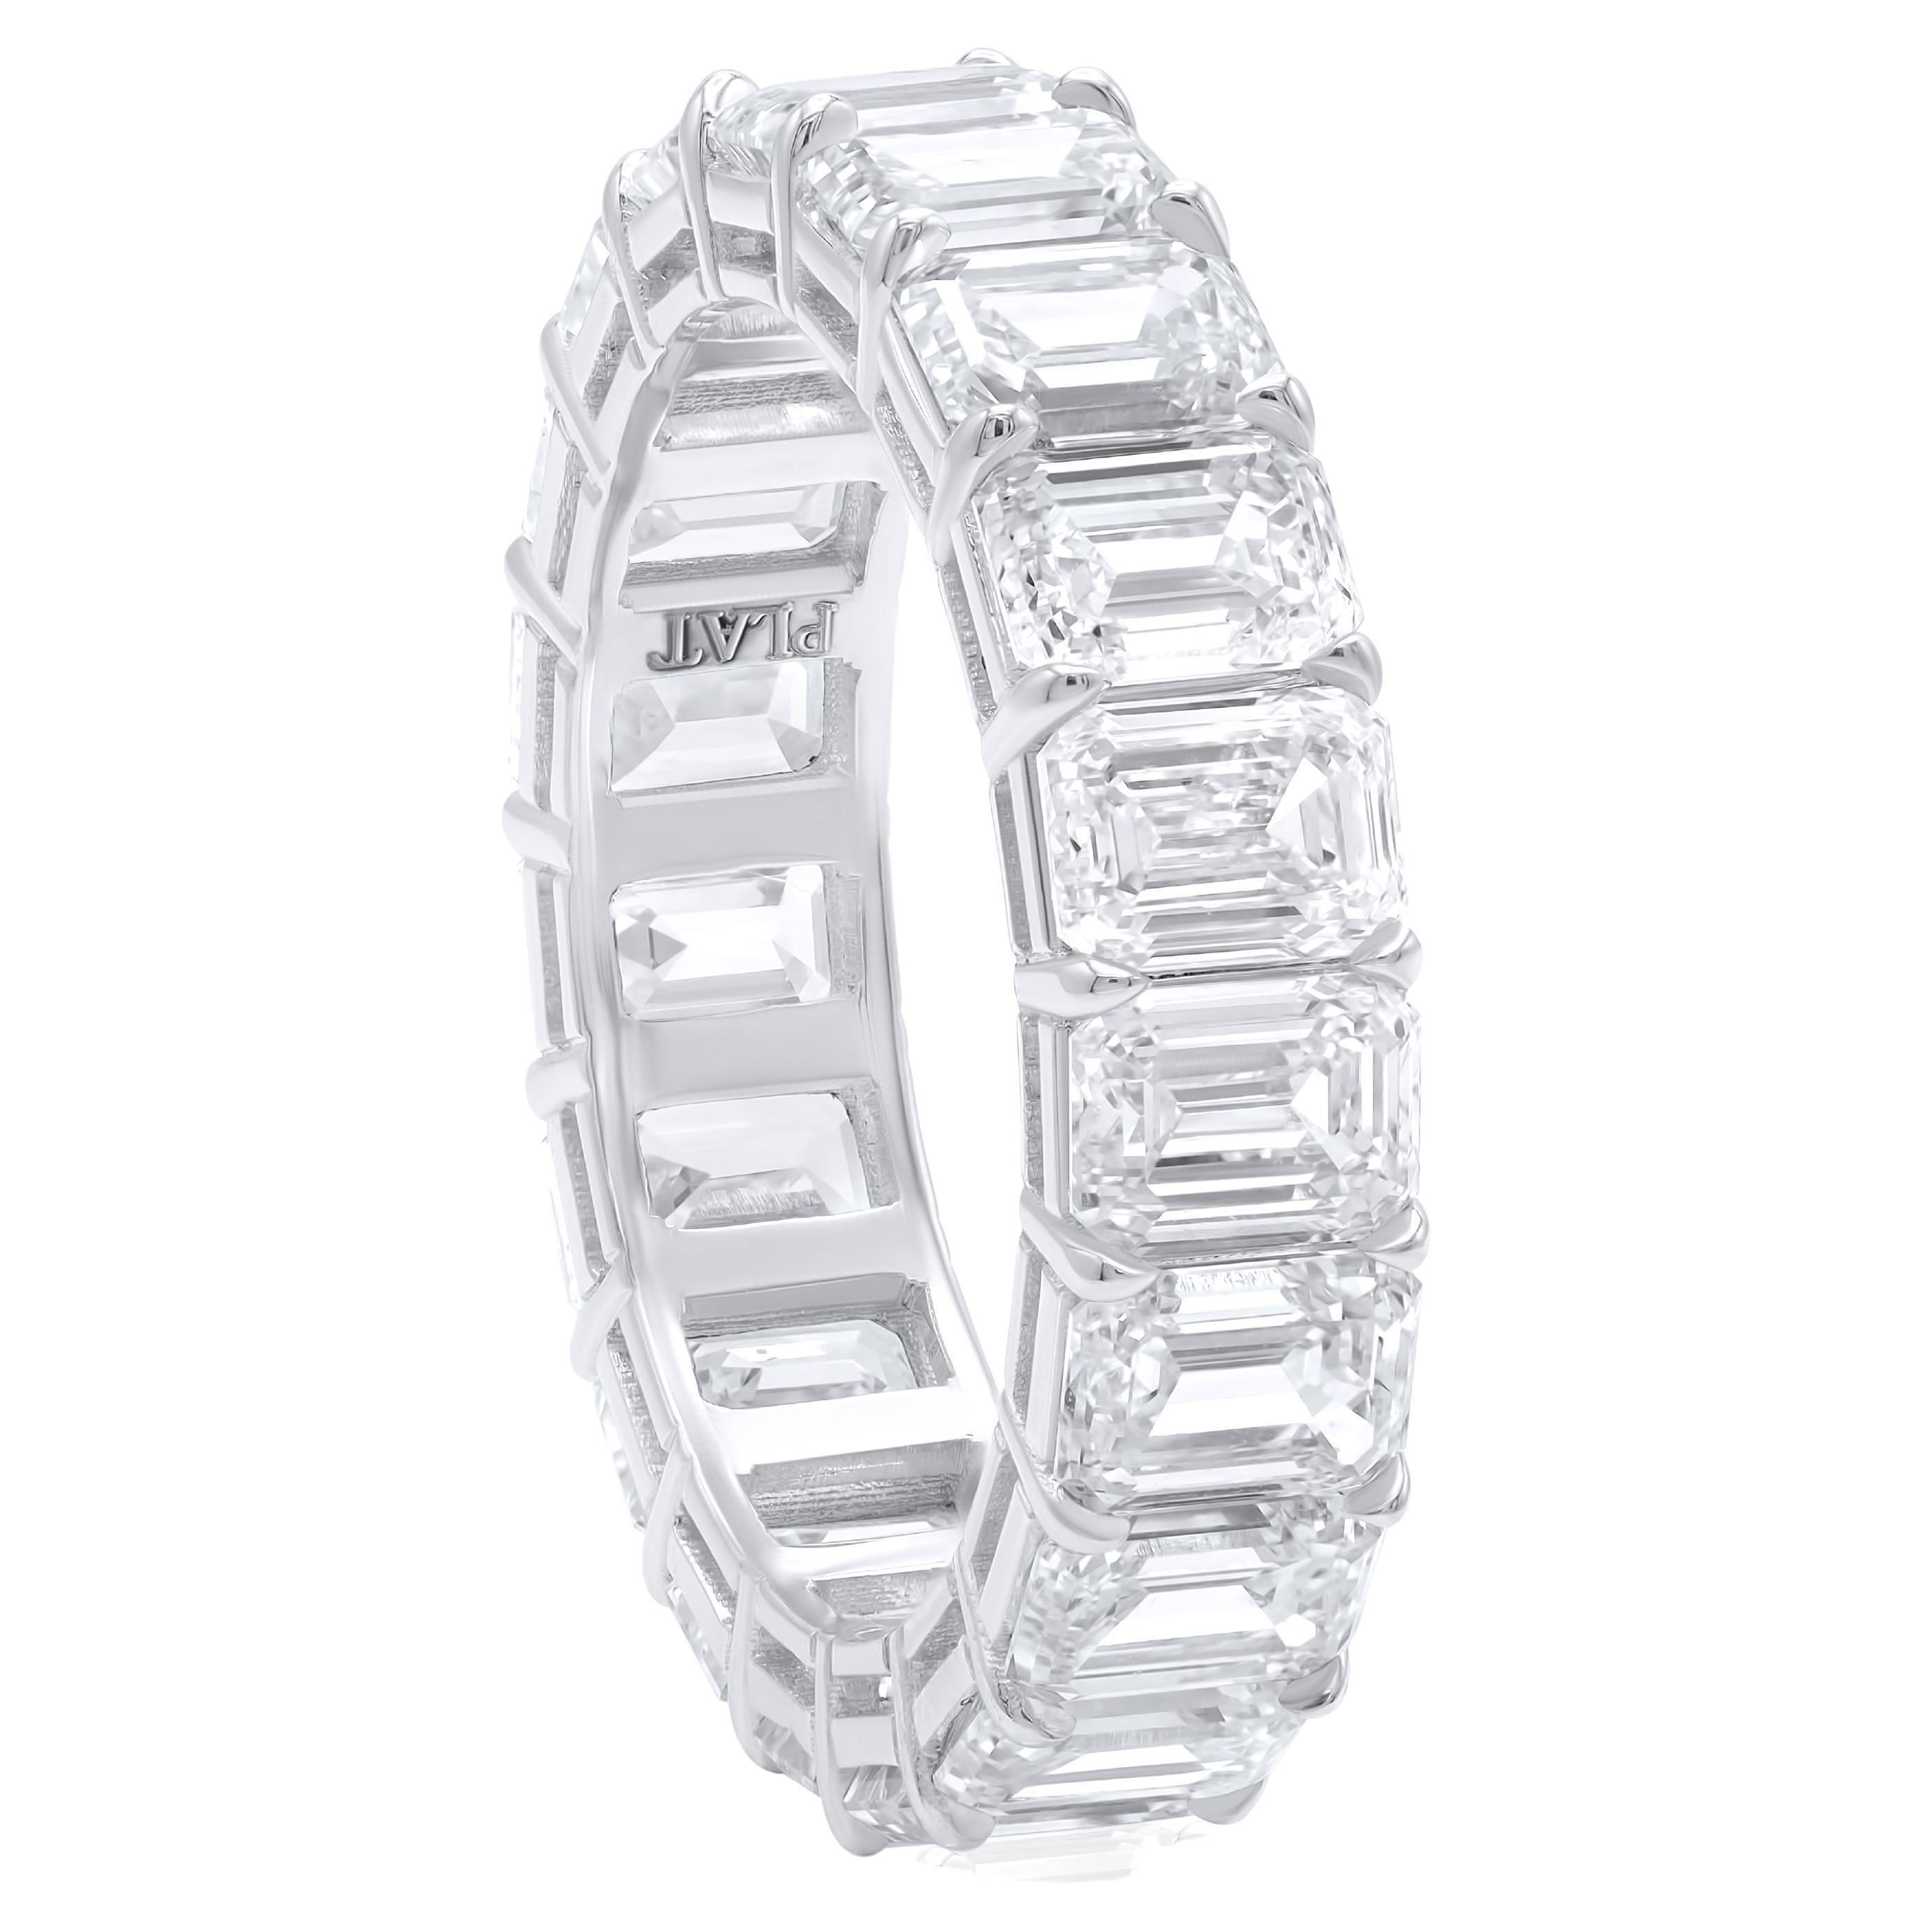 Diana M. PLATINUM EMERALD CUT DIAMONDS ETERNITY BAND, FEATURES 11.34CTS  For Sale